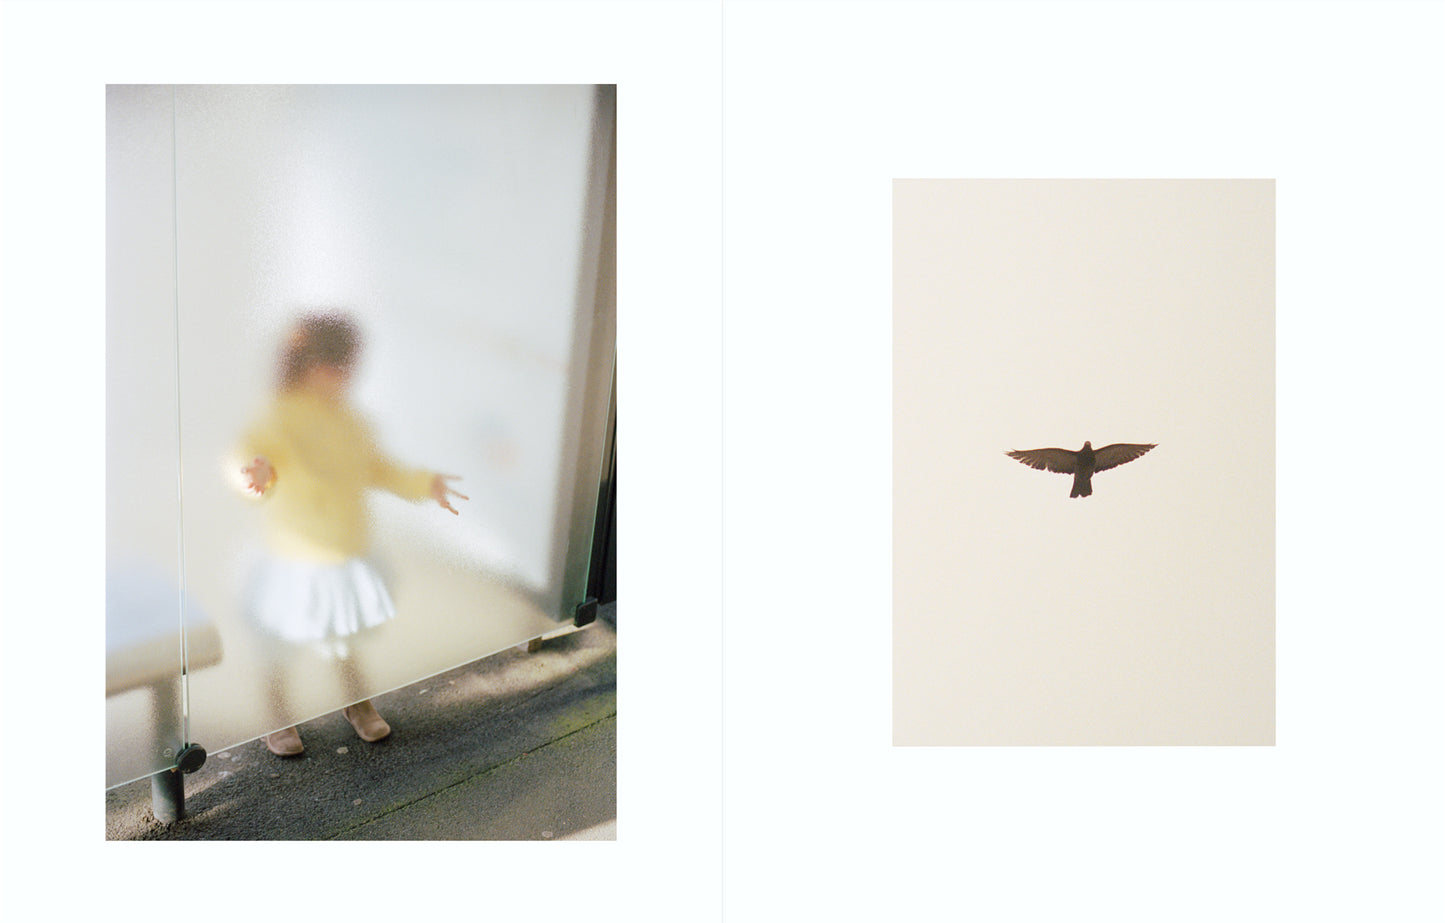 Ola Rindal - Notes on Ordinary Spaces